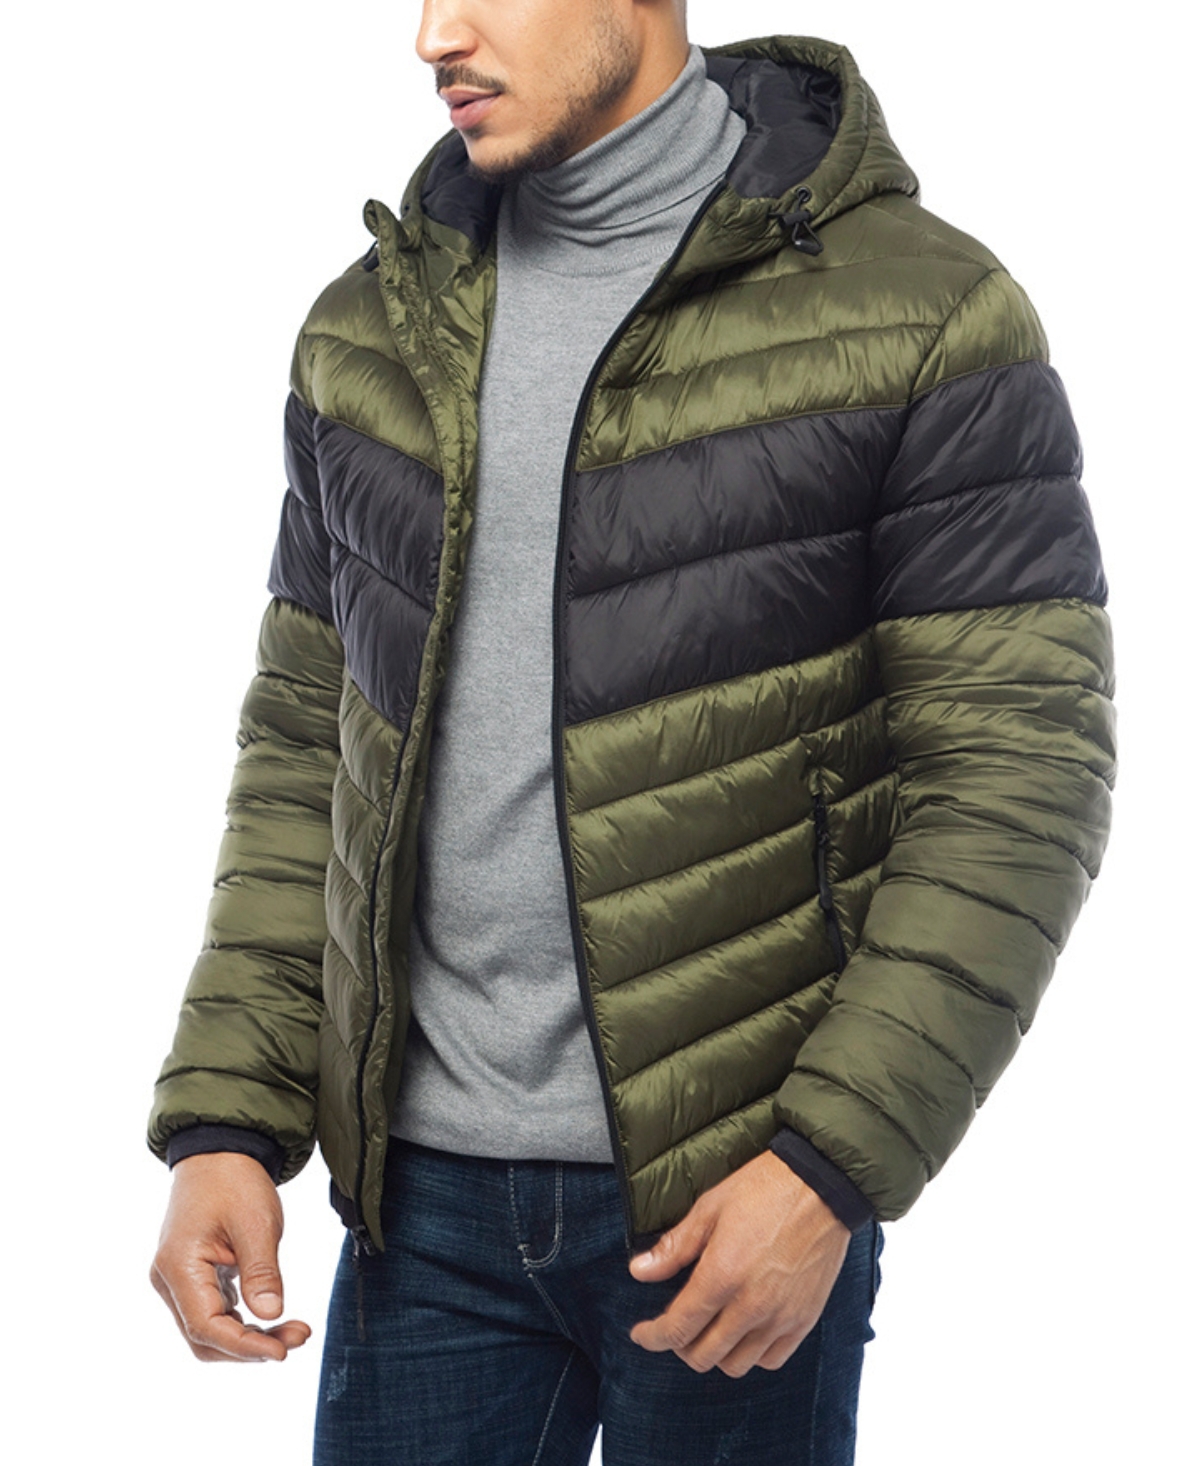 Men's Light Weight Quilted Hooded Puffer Jacket Coat - Navy